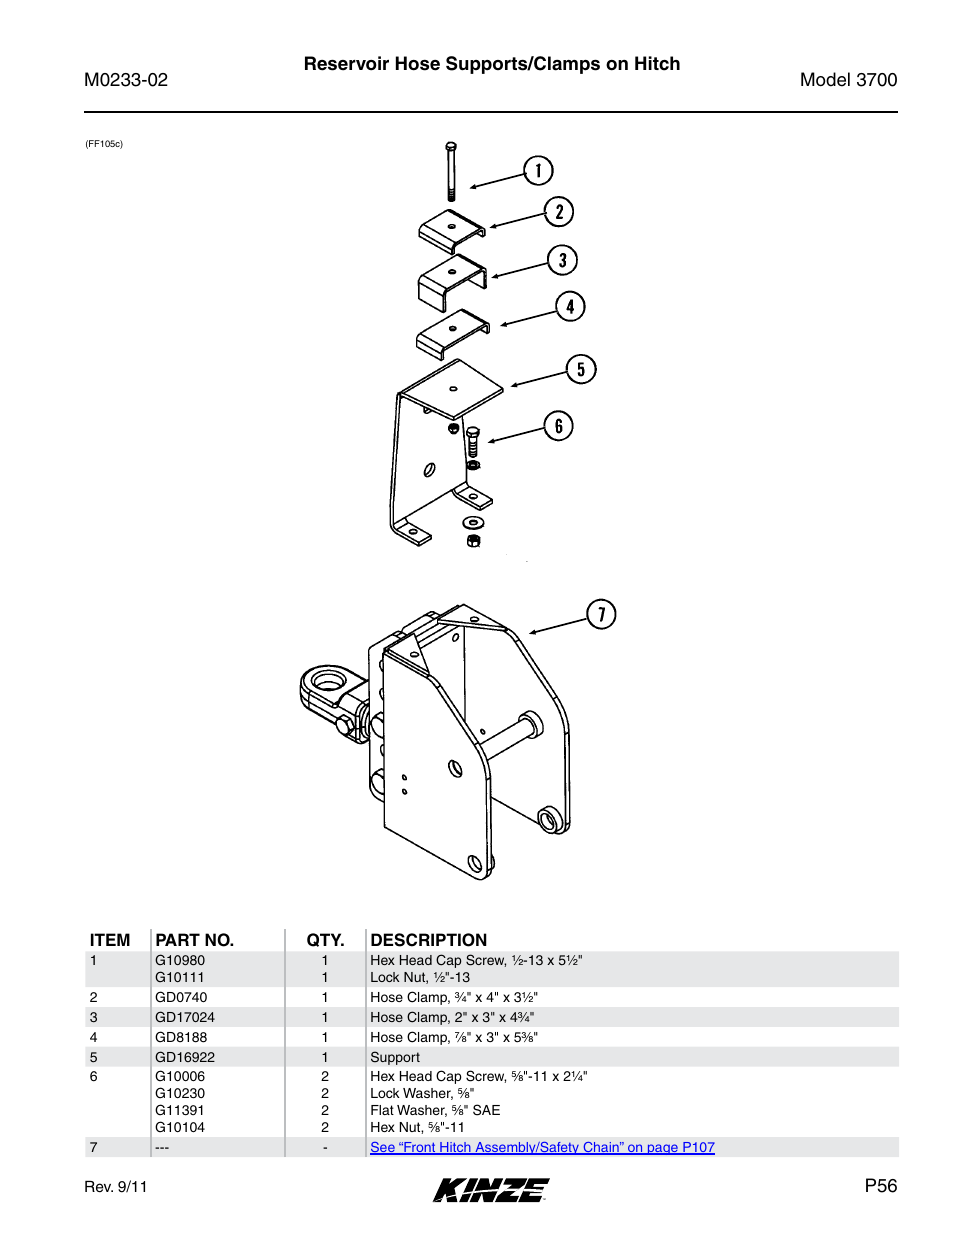 Reservoir hose supports/clamps on hitch | Kinze 3700 Front Folding Planter Rev. 6/14 User Manual | Page 59 / 284